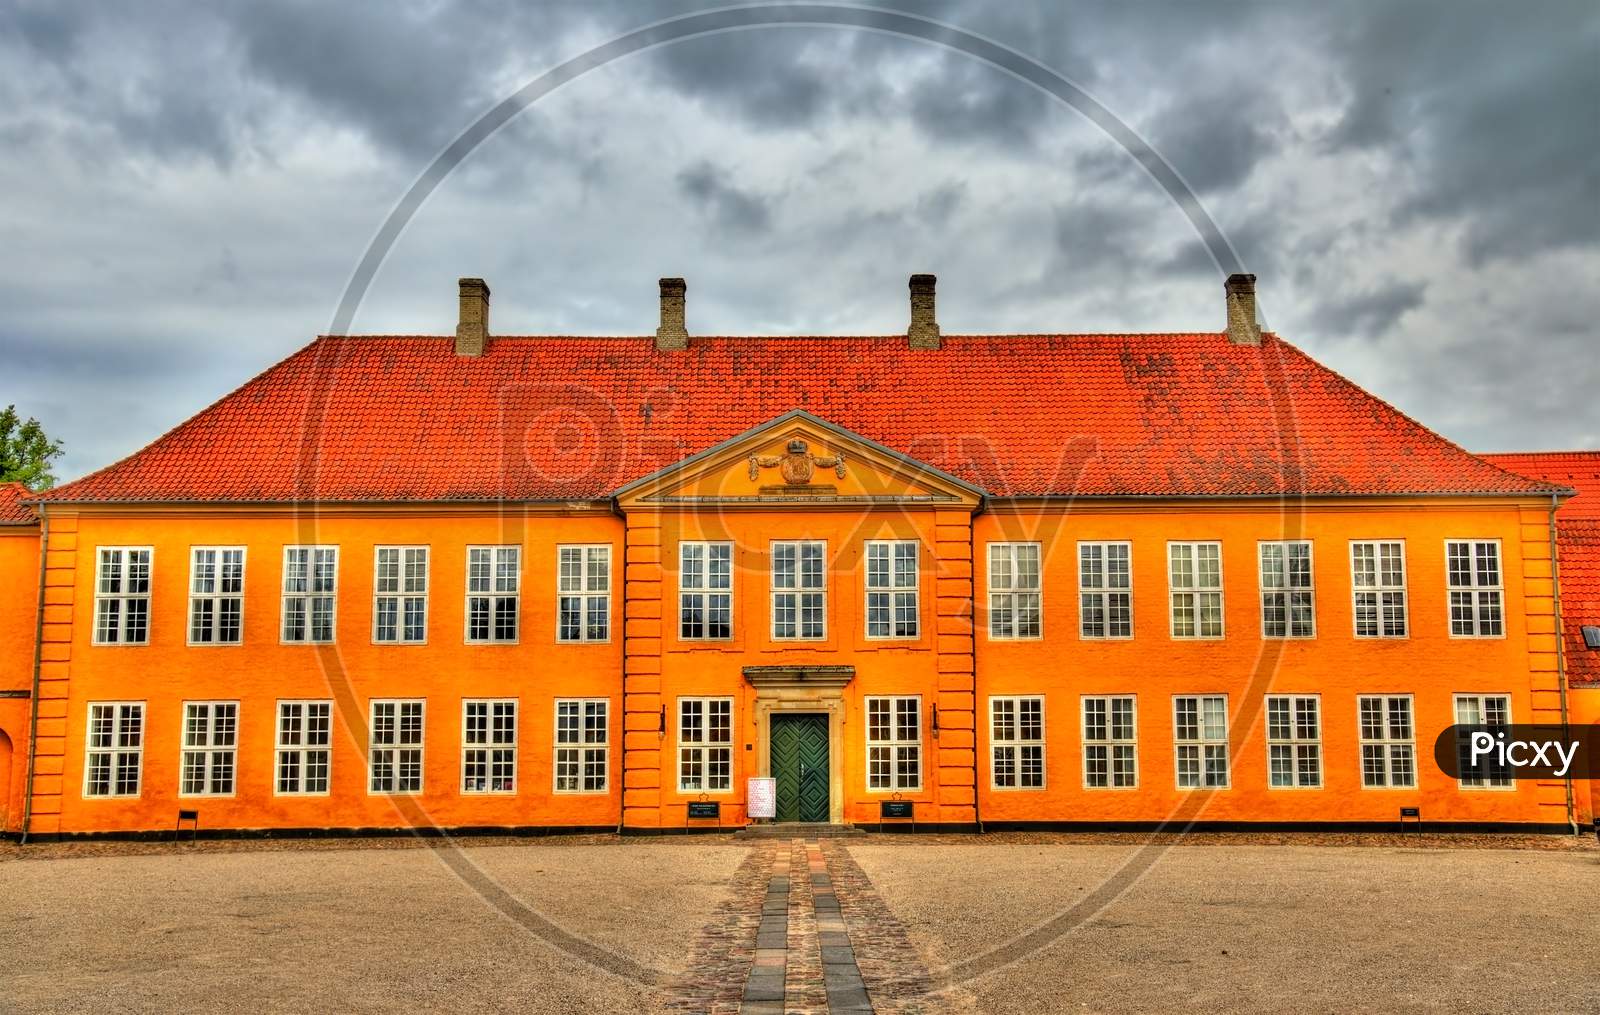 Former Royal Mansion, Now Contemporary Art Museum In Roskilde, Denmark